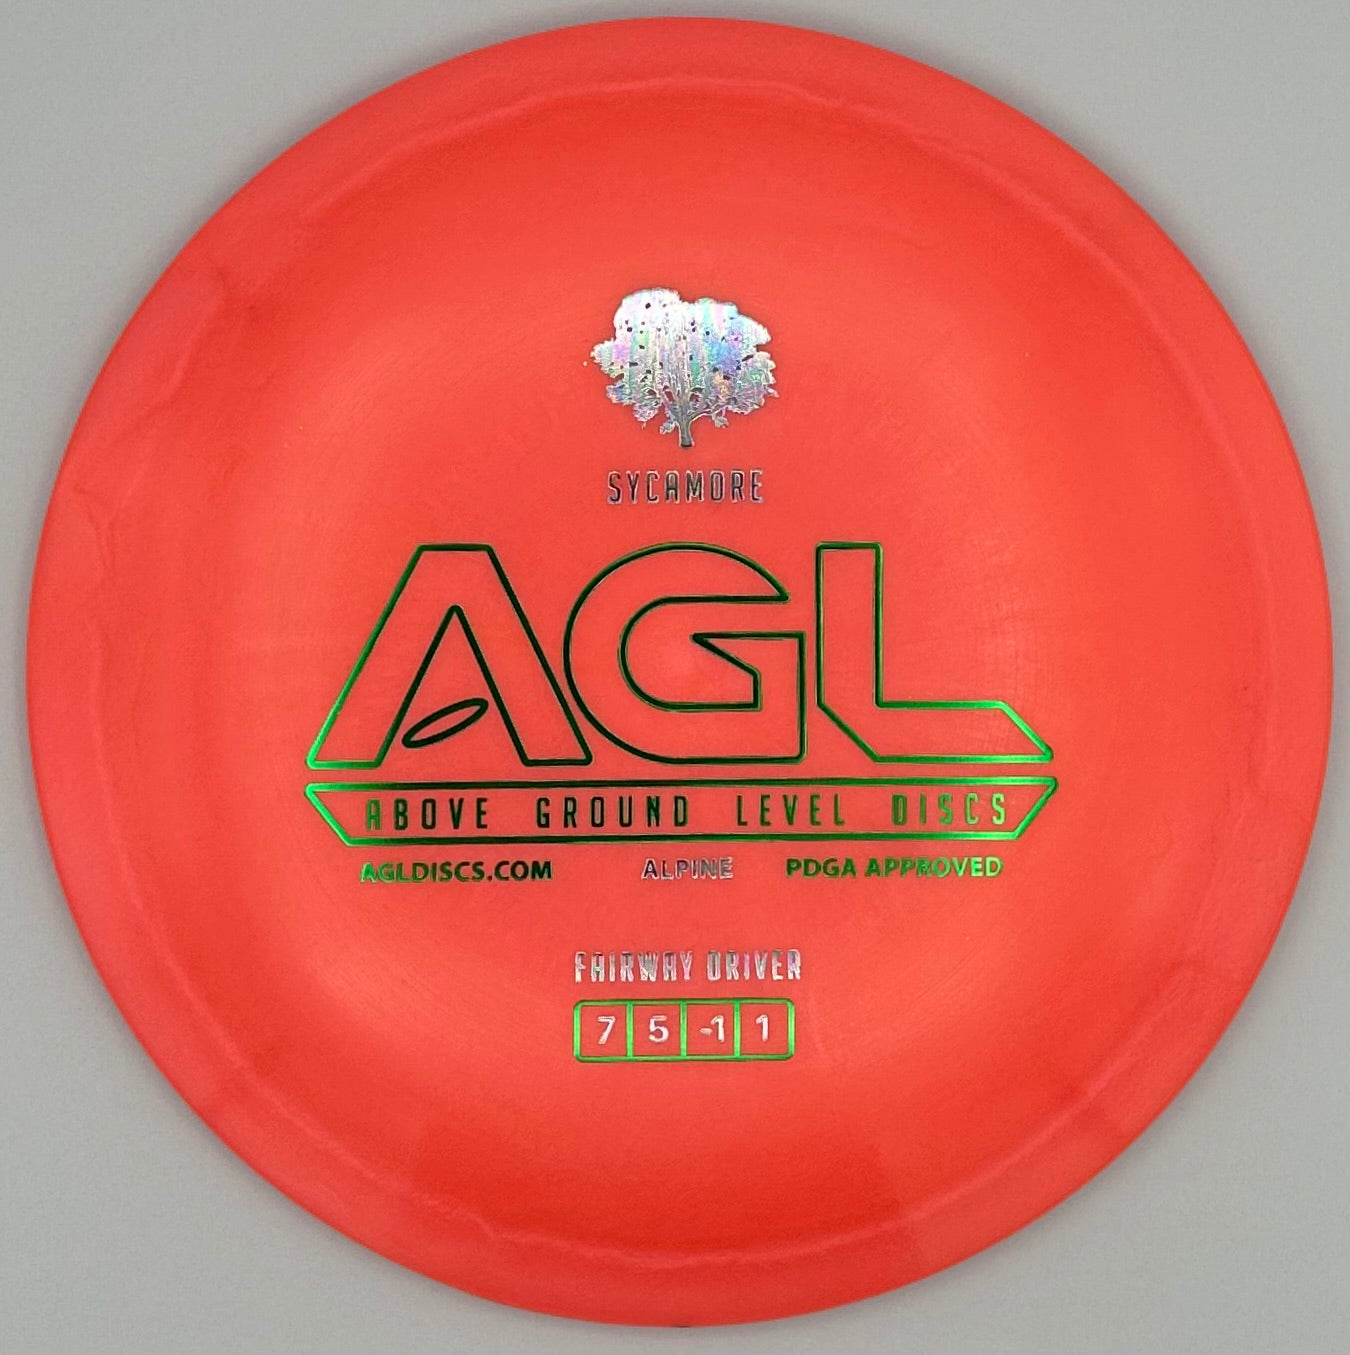 AGL Discs - Faded Red Alpine Sycamore (AGL Bar Stamp)